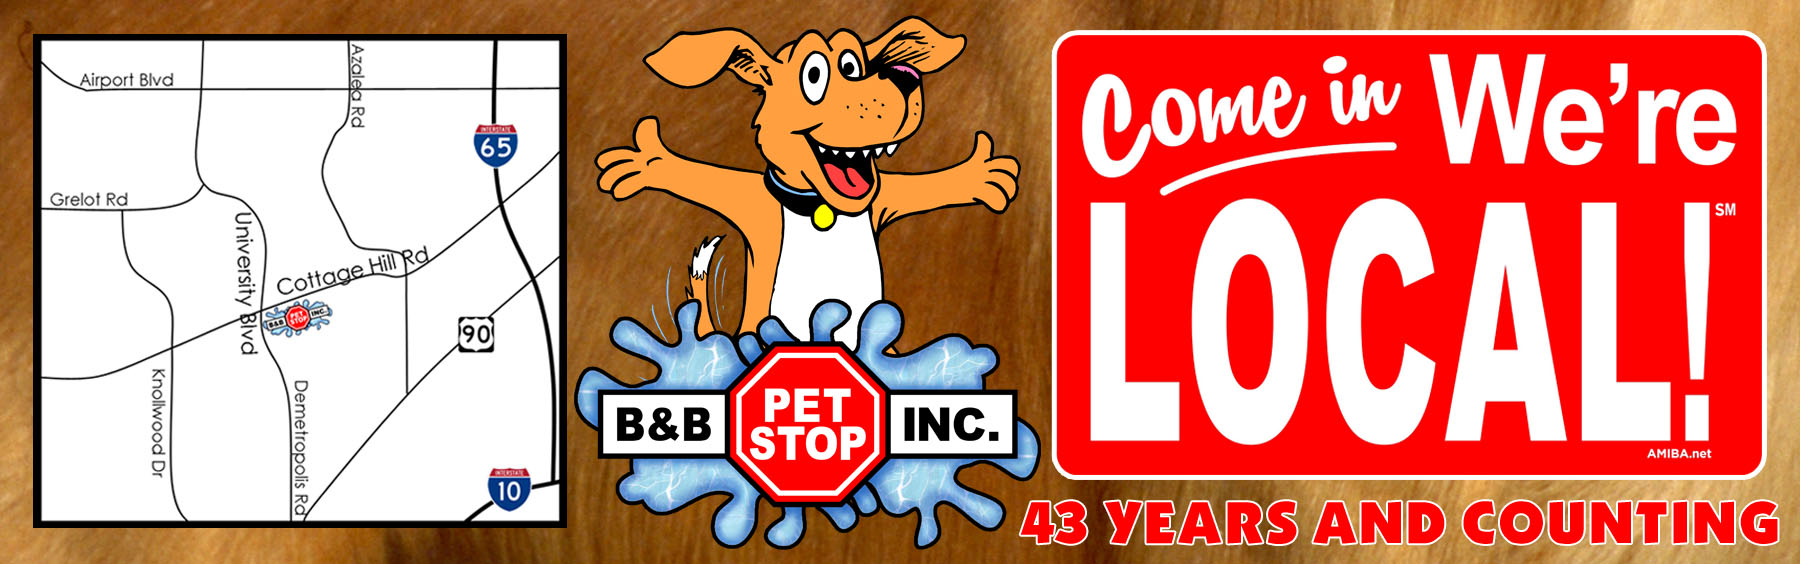 B&B Pet Stop is your local pet store